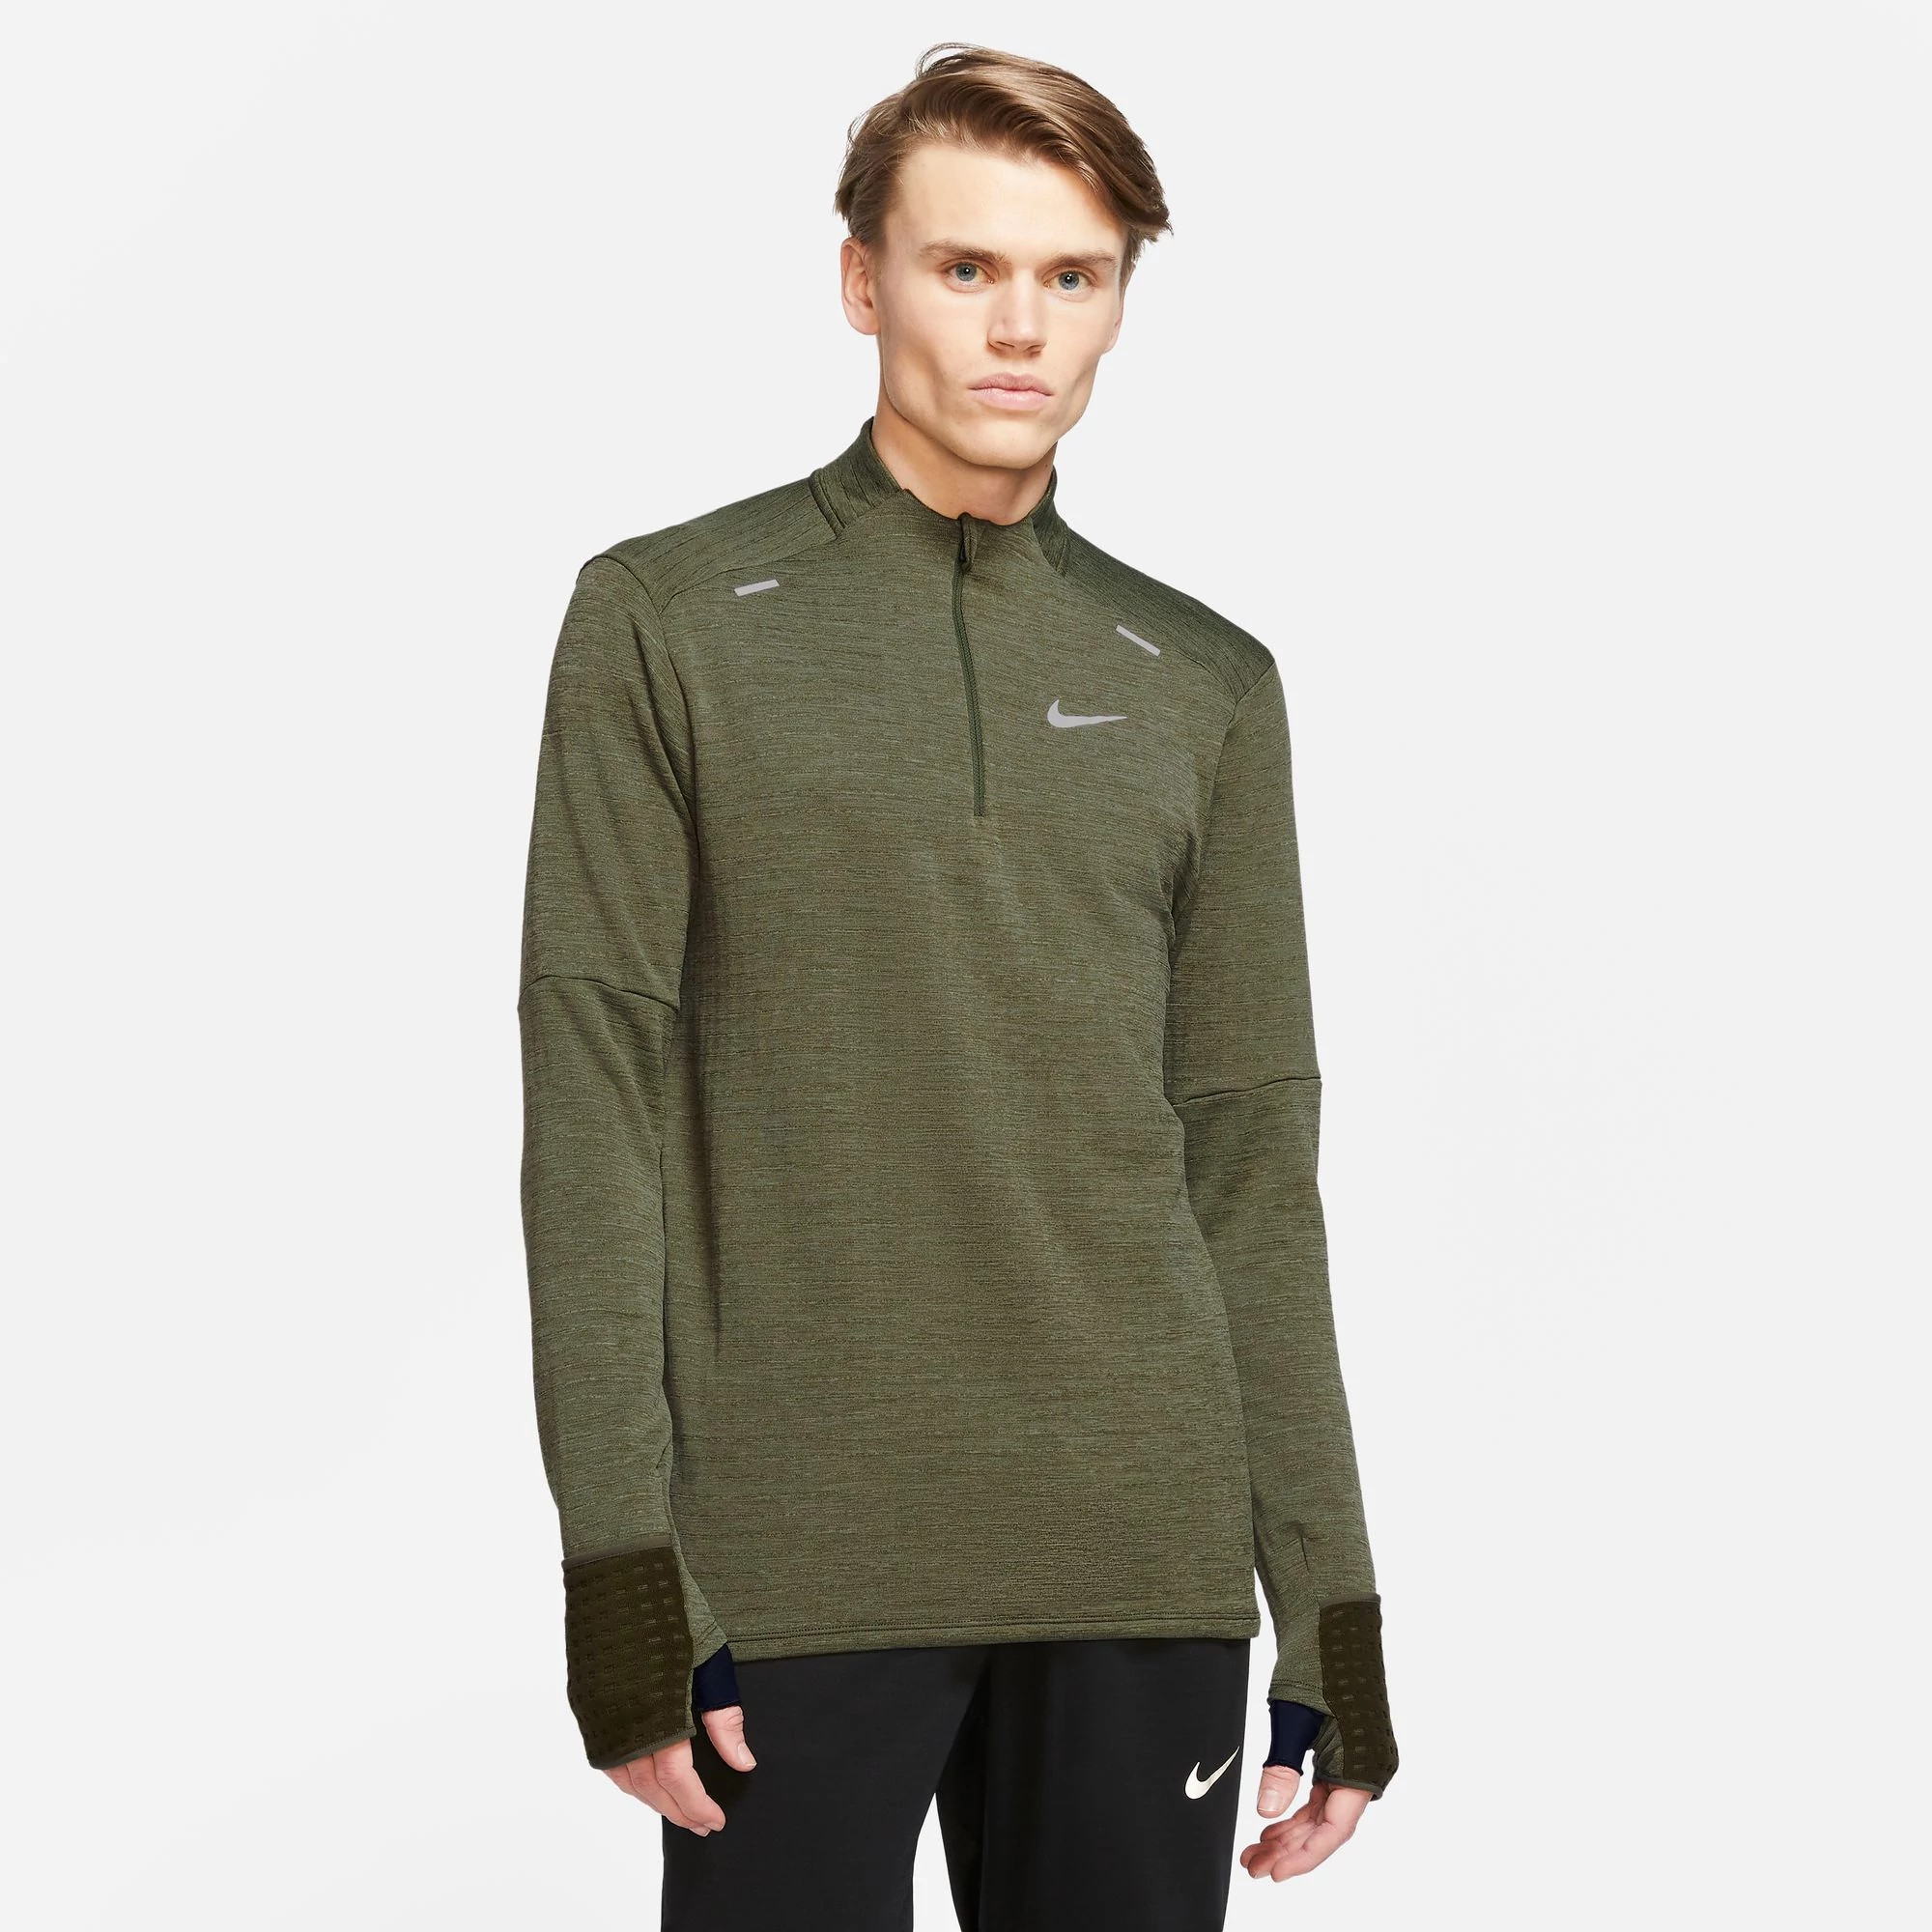 Mens Nike Therma-FIT Repel Element Long Sleeve Zip Technical Tops